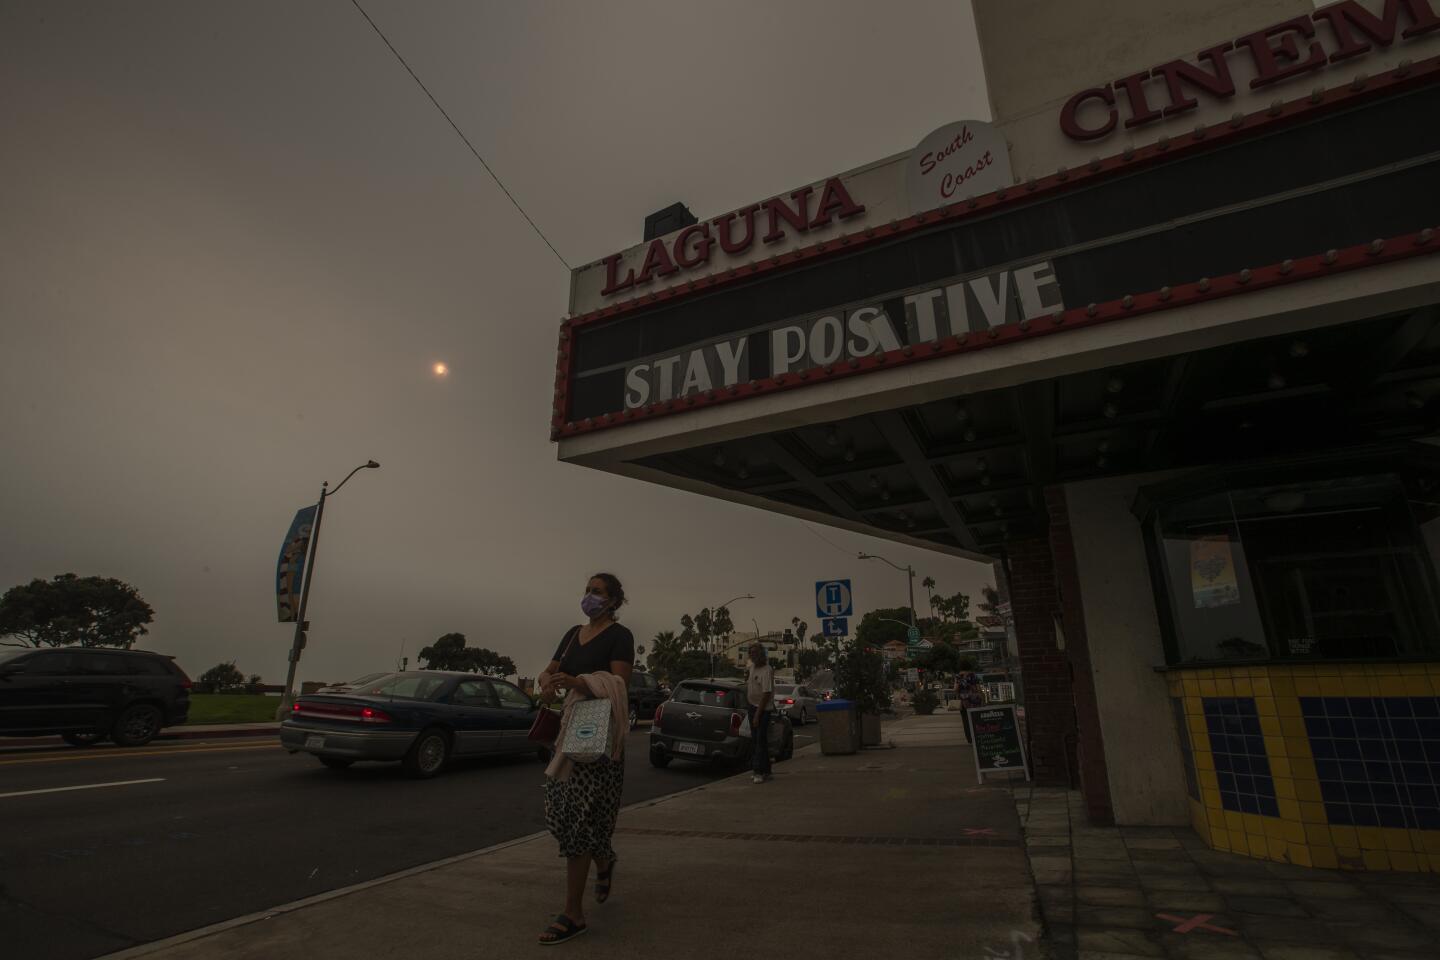 An upbeat message on the South Coast Cinemas marquee in Laguna Beach is dimmed by smoky air.